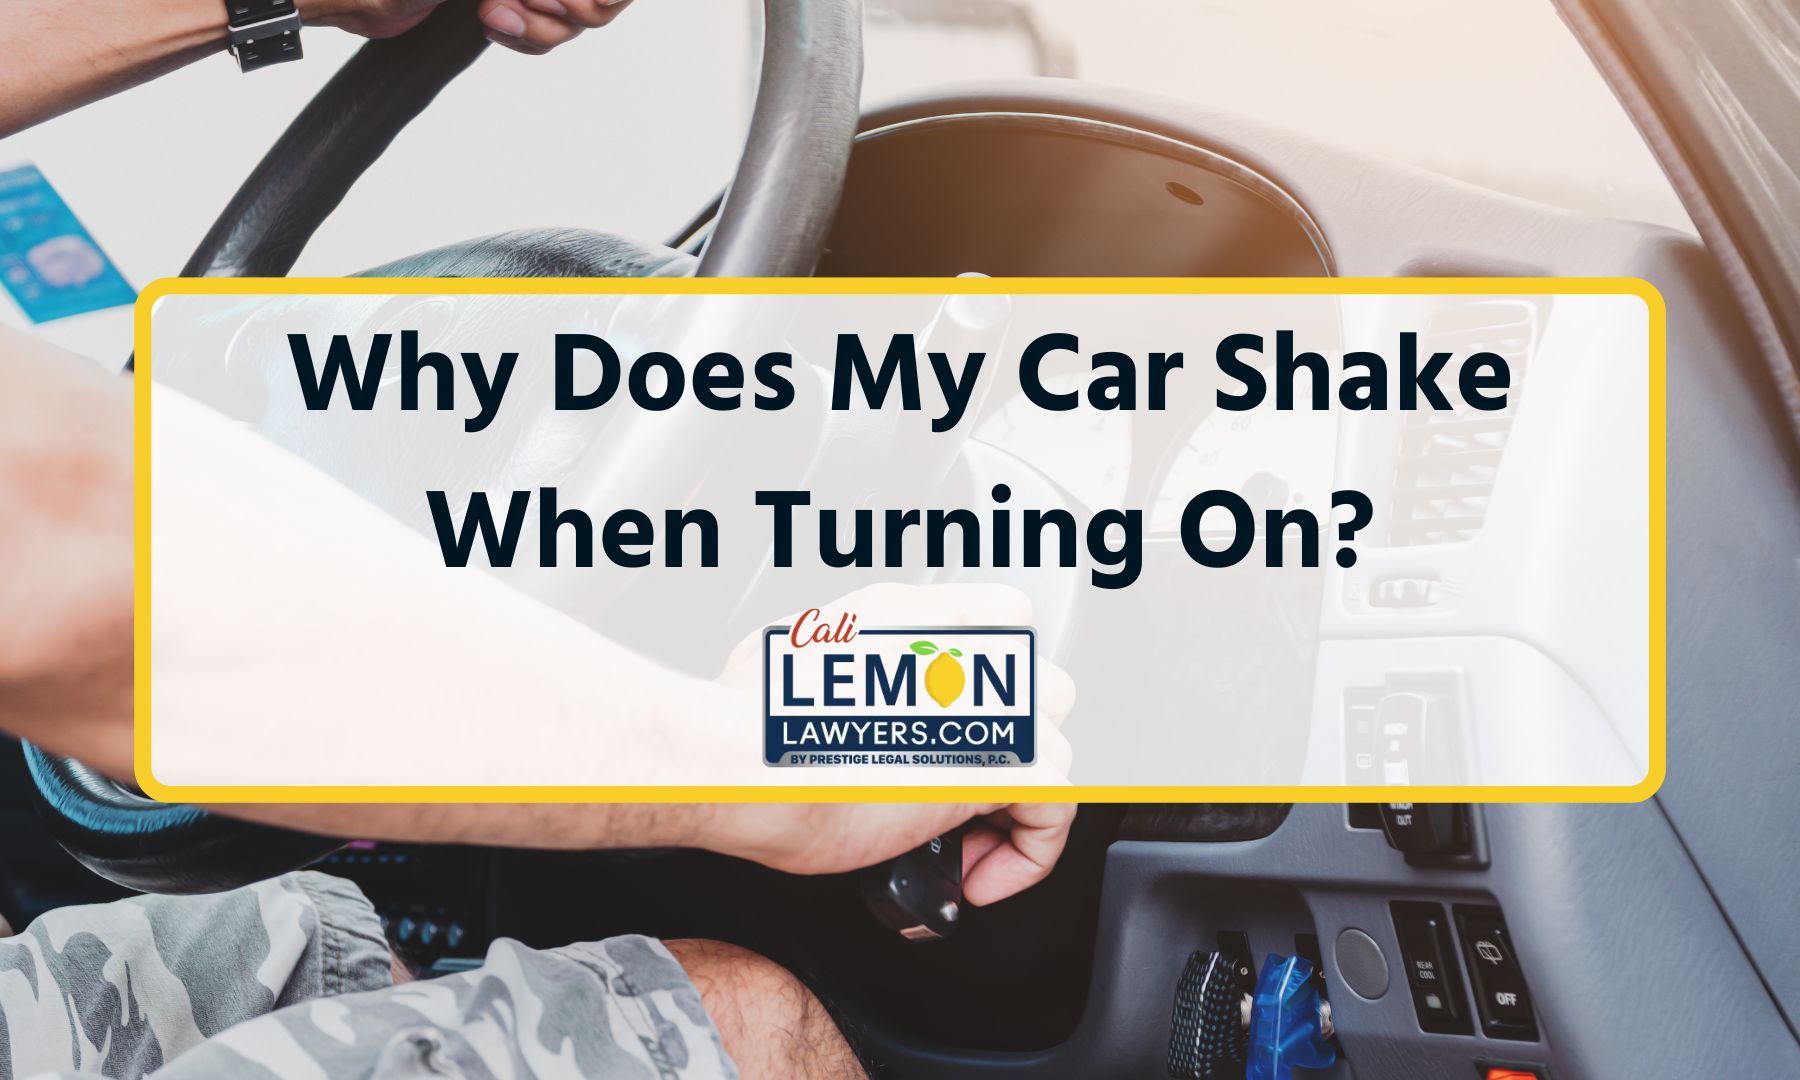 Why Does My Car Shake When Turning On?